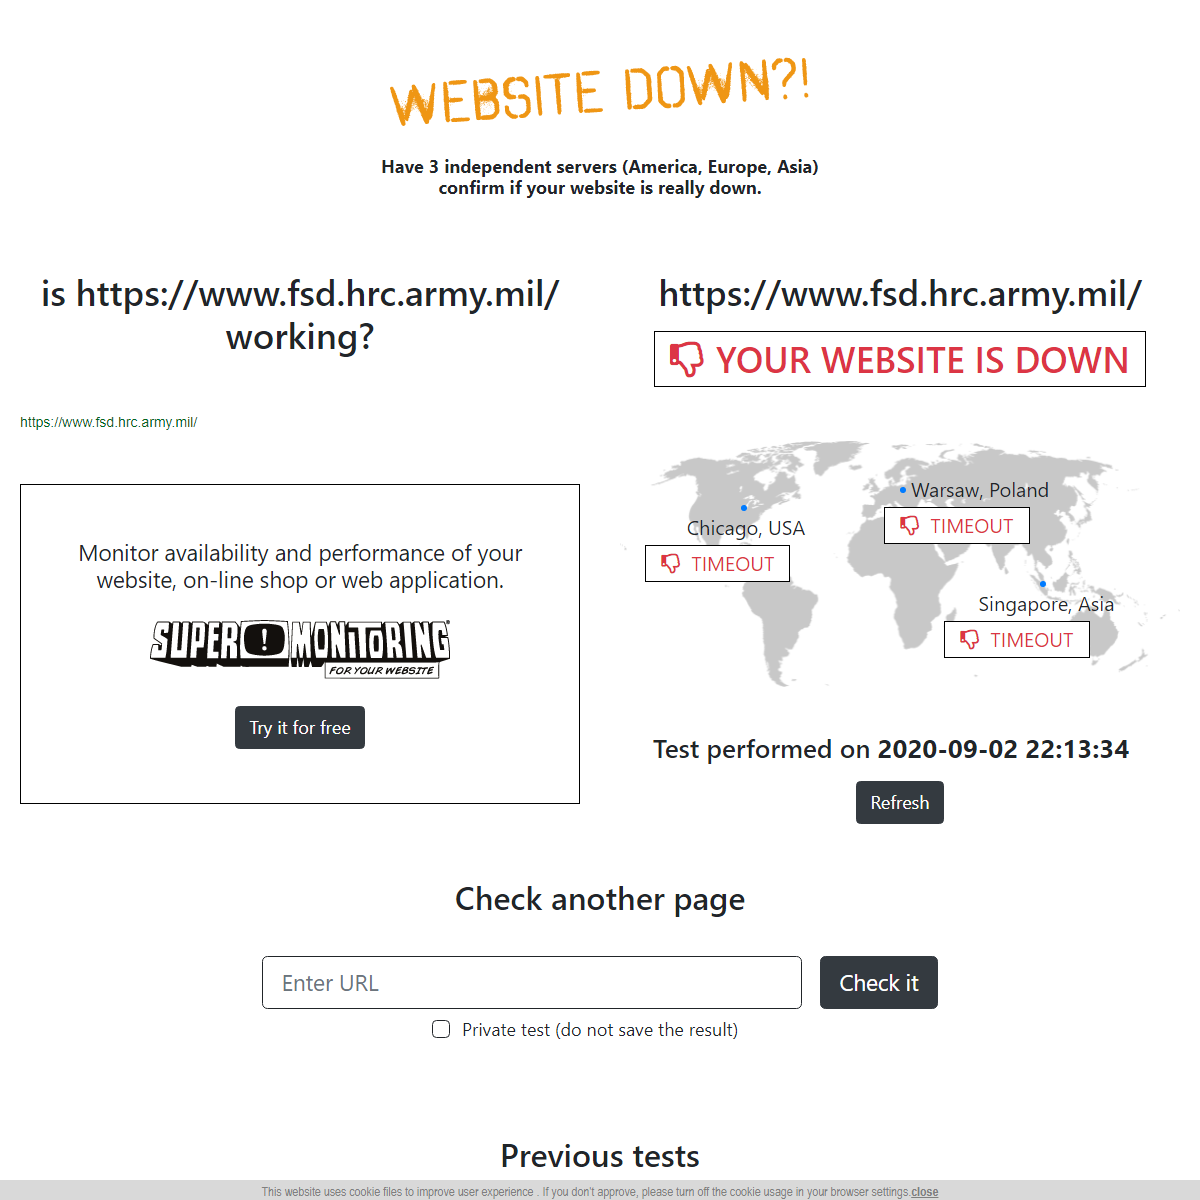 A complete backup of https://www.website-down.com/https%253A%252F%252Fwww.fsd.hrc.army.mil%252F